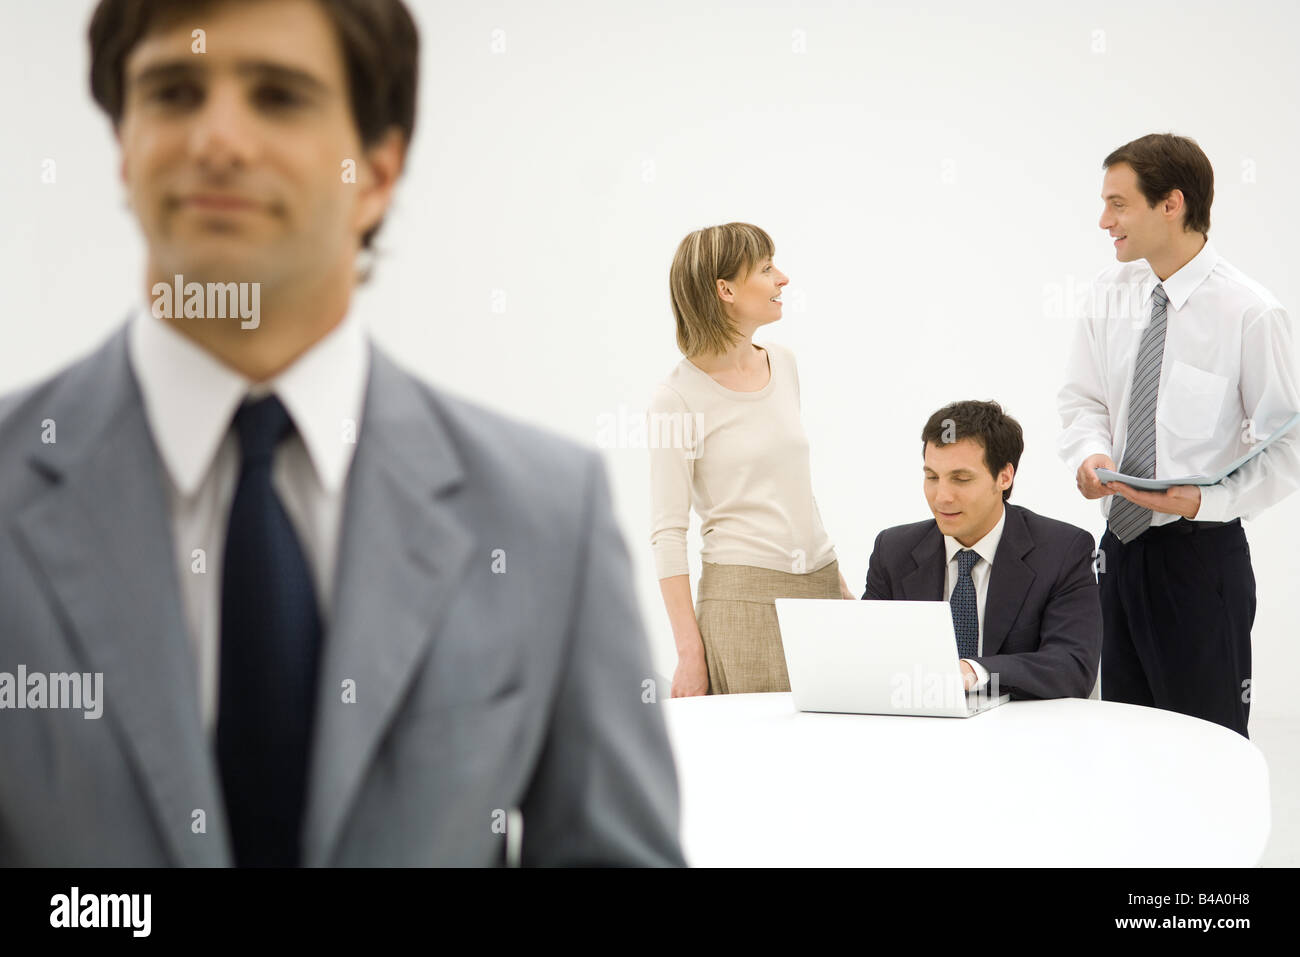 Business associates talking, man in foreground Stock Photo